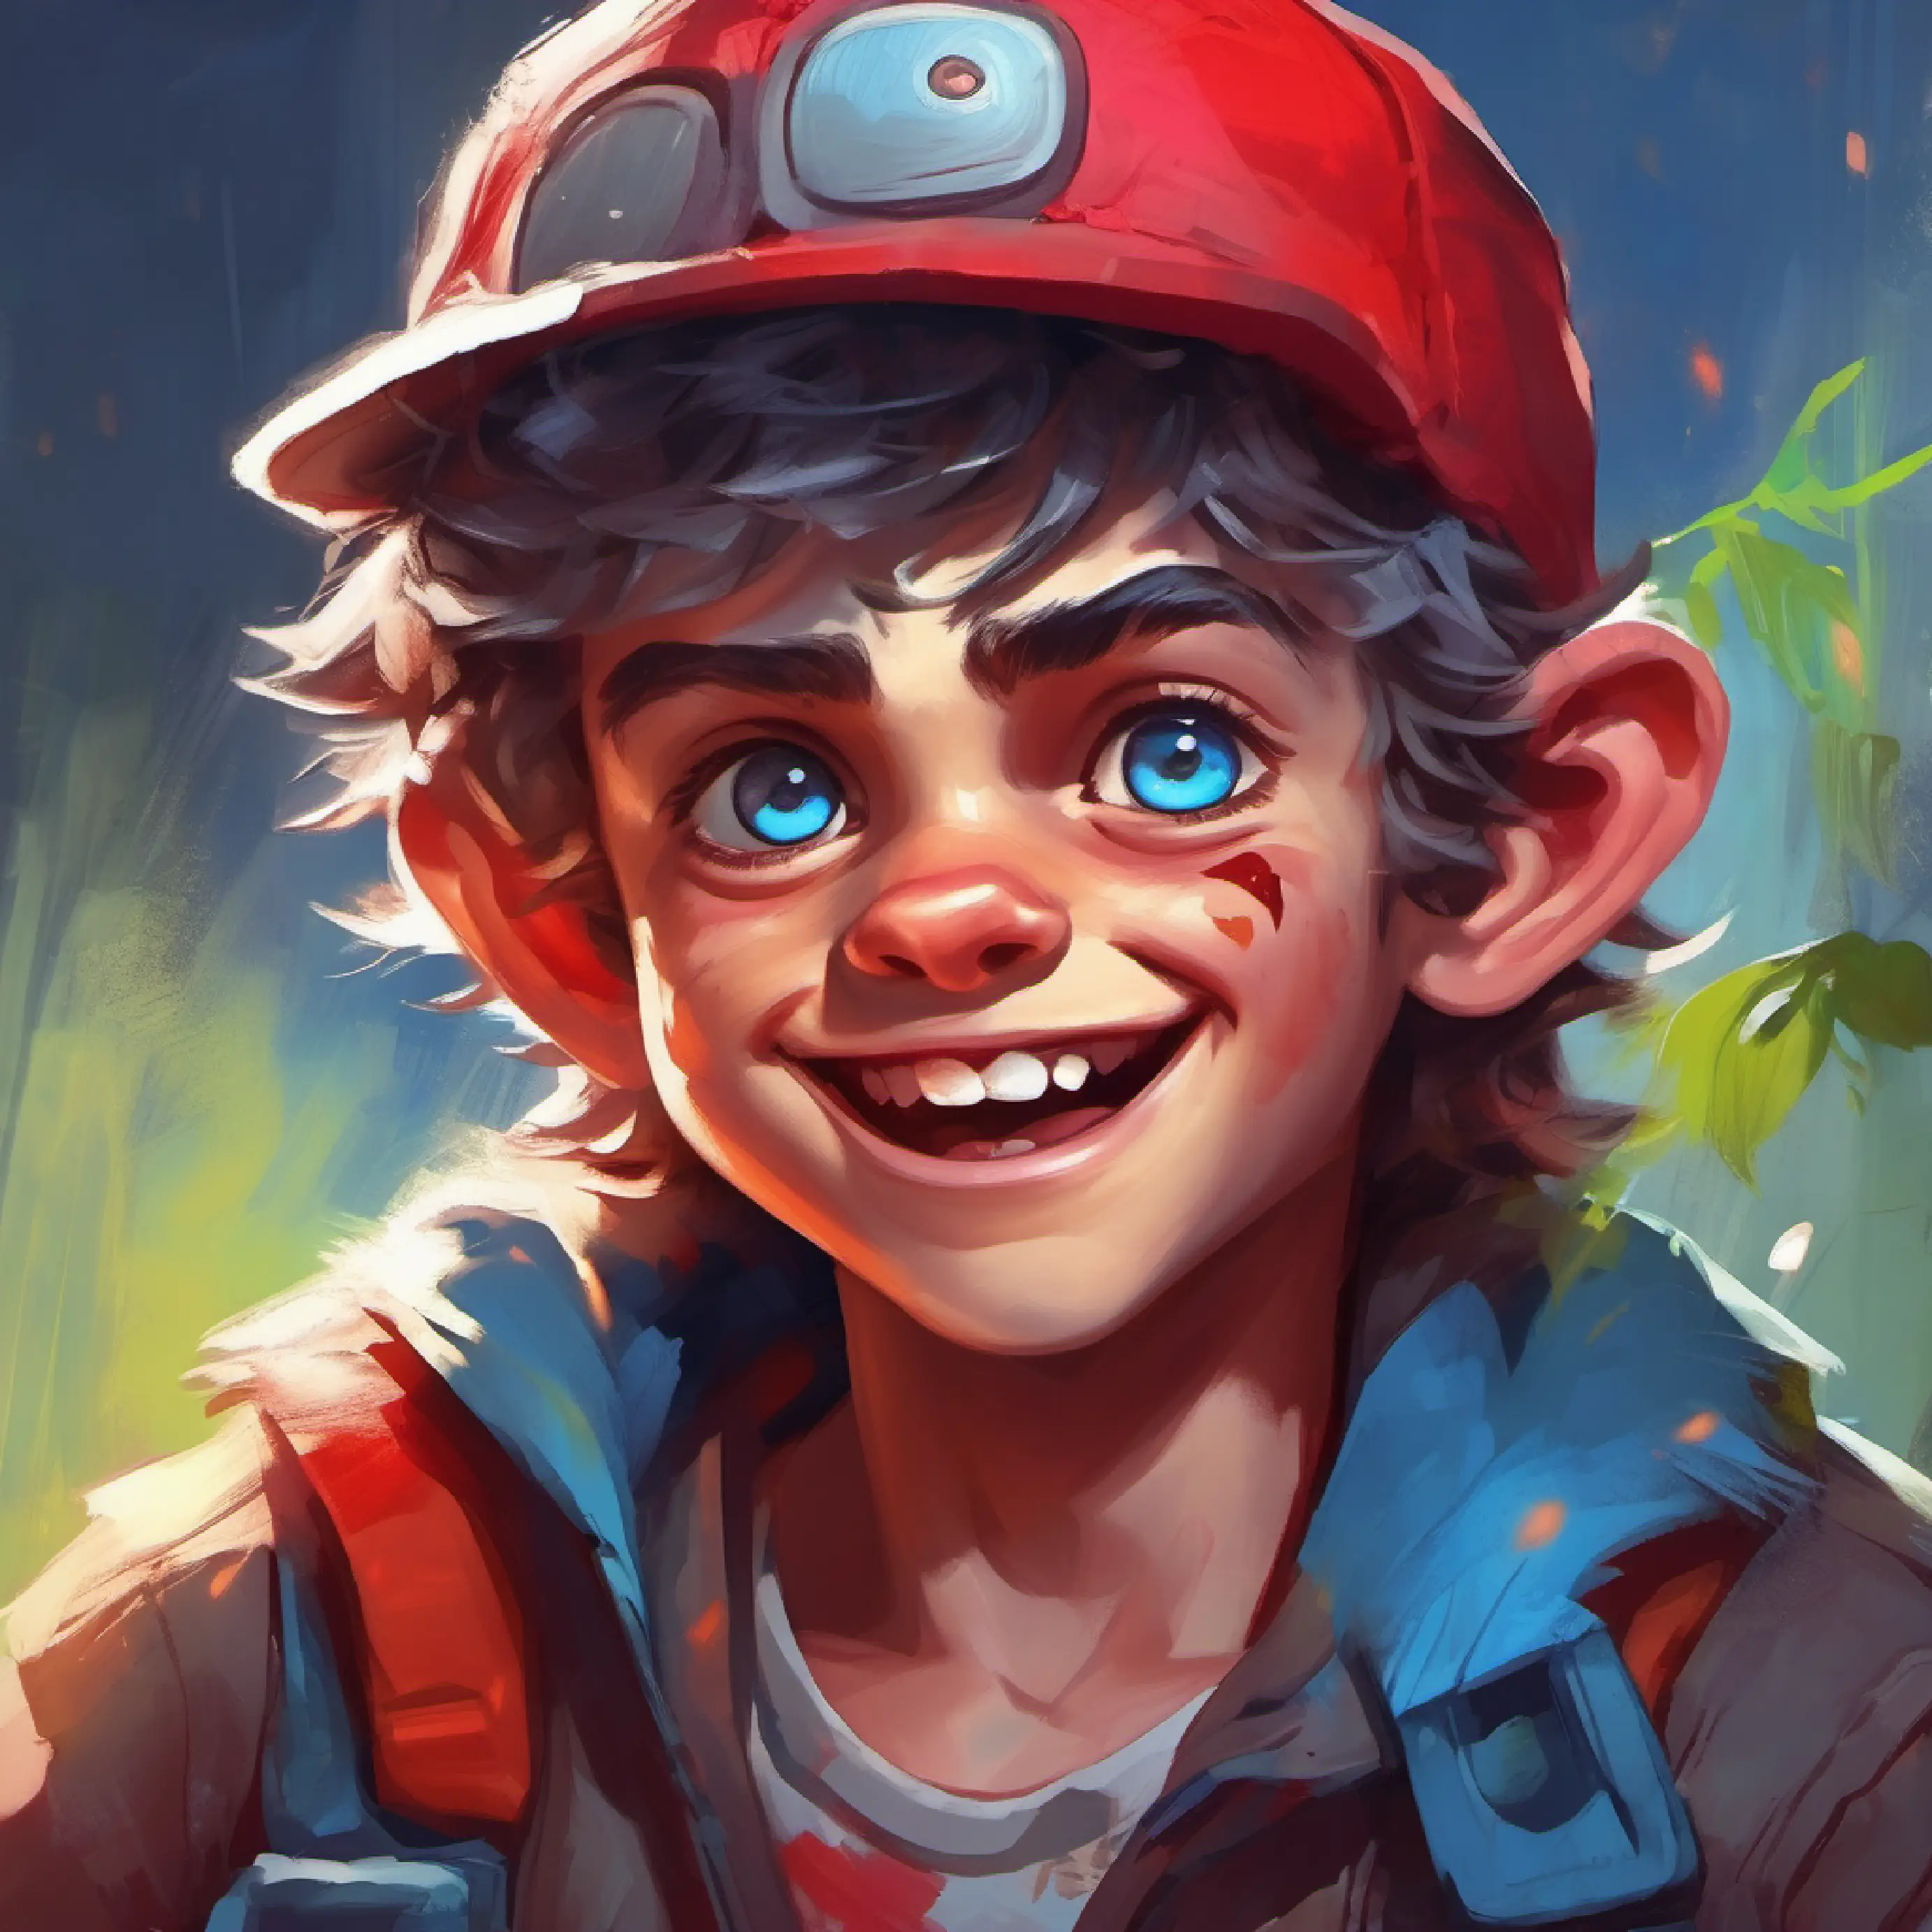 Zombie with a friendly smile, sparkling blue eyes, messy hair protects Boy with brave heart, wearing a red cap, curious eyes from a Gorilla Zombie.